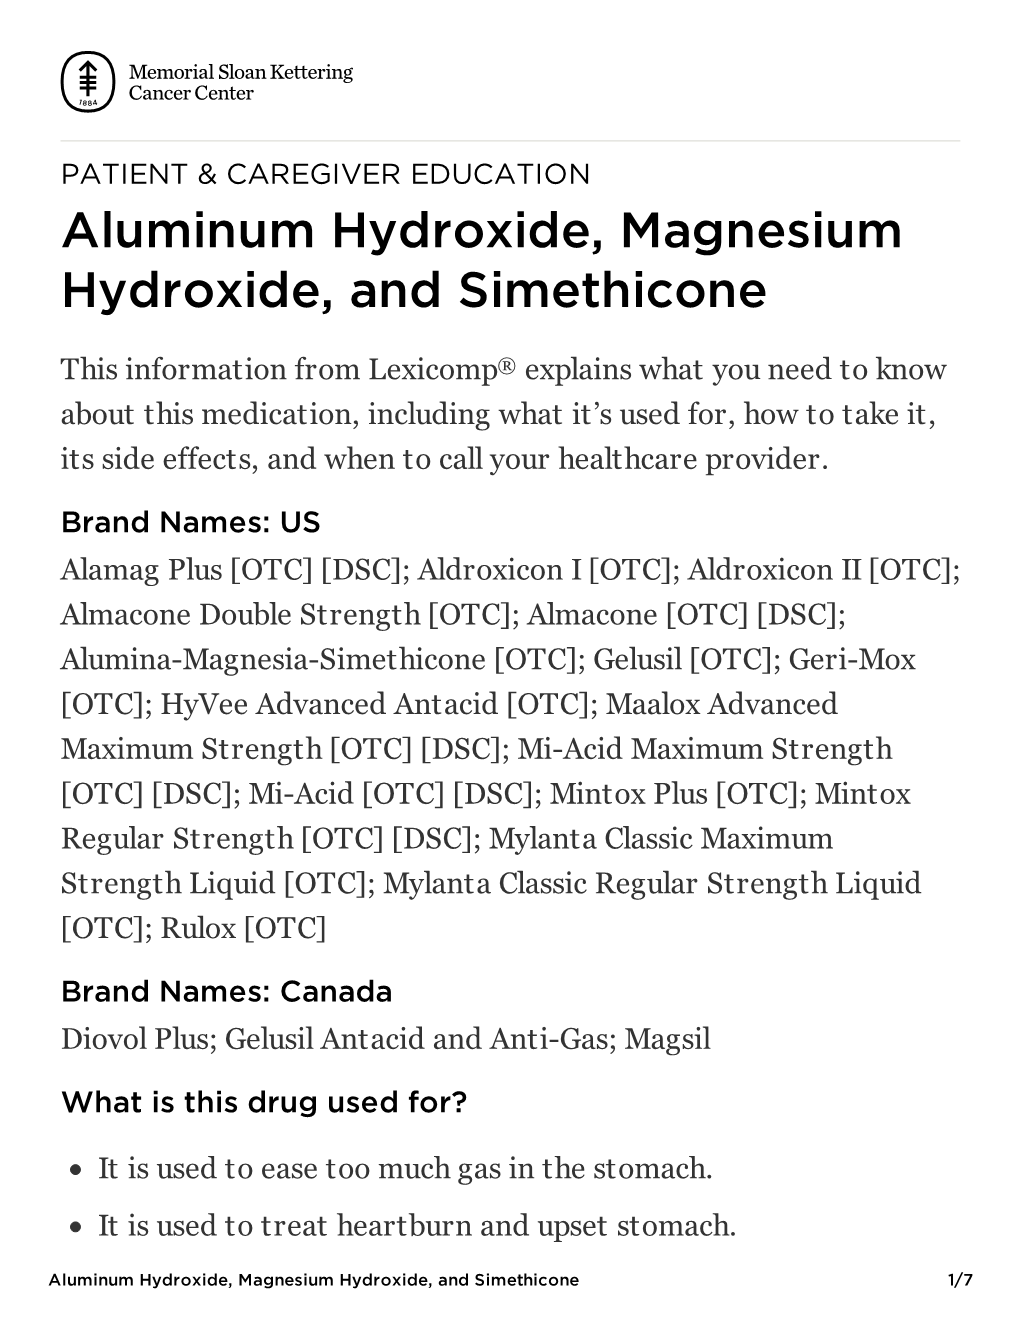 Aluminum Hydroxide, Magnesium Hydroxide, and Simethicone | Memorial Sloan Kettering Cancer Center